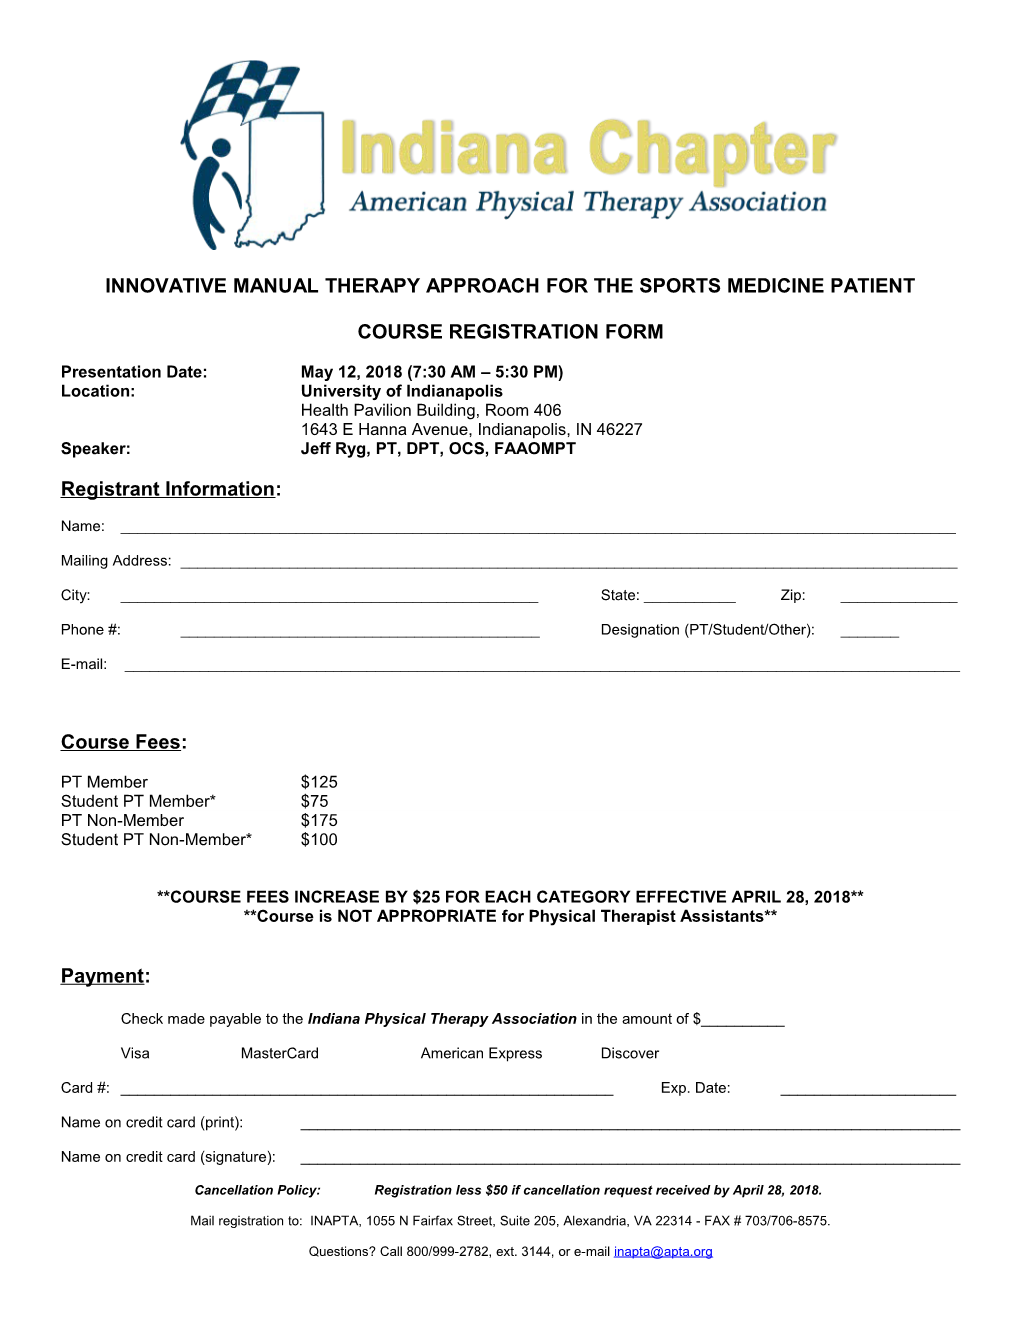 Innovative Manual Therapy Approach for the Sports Medicine Patient